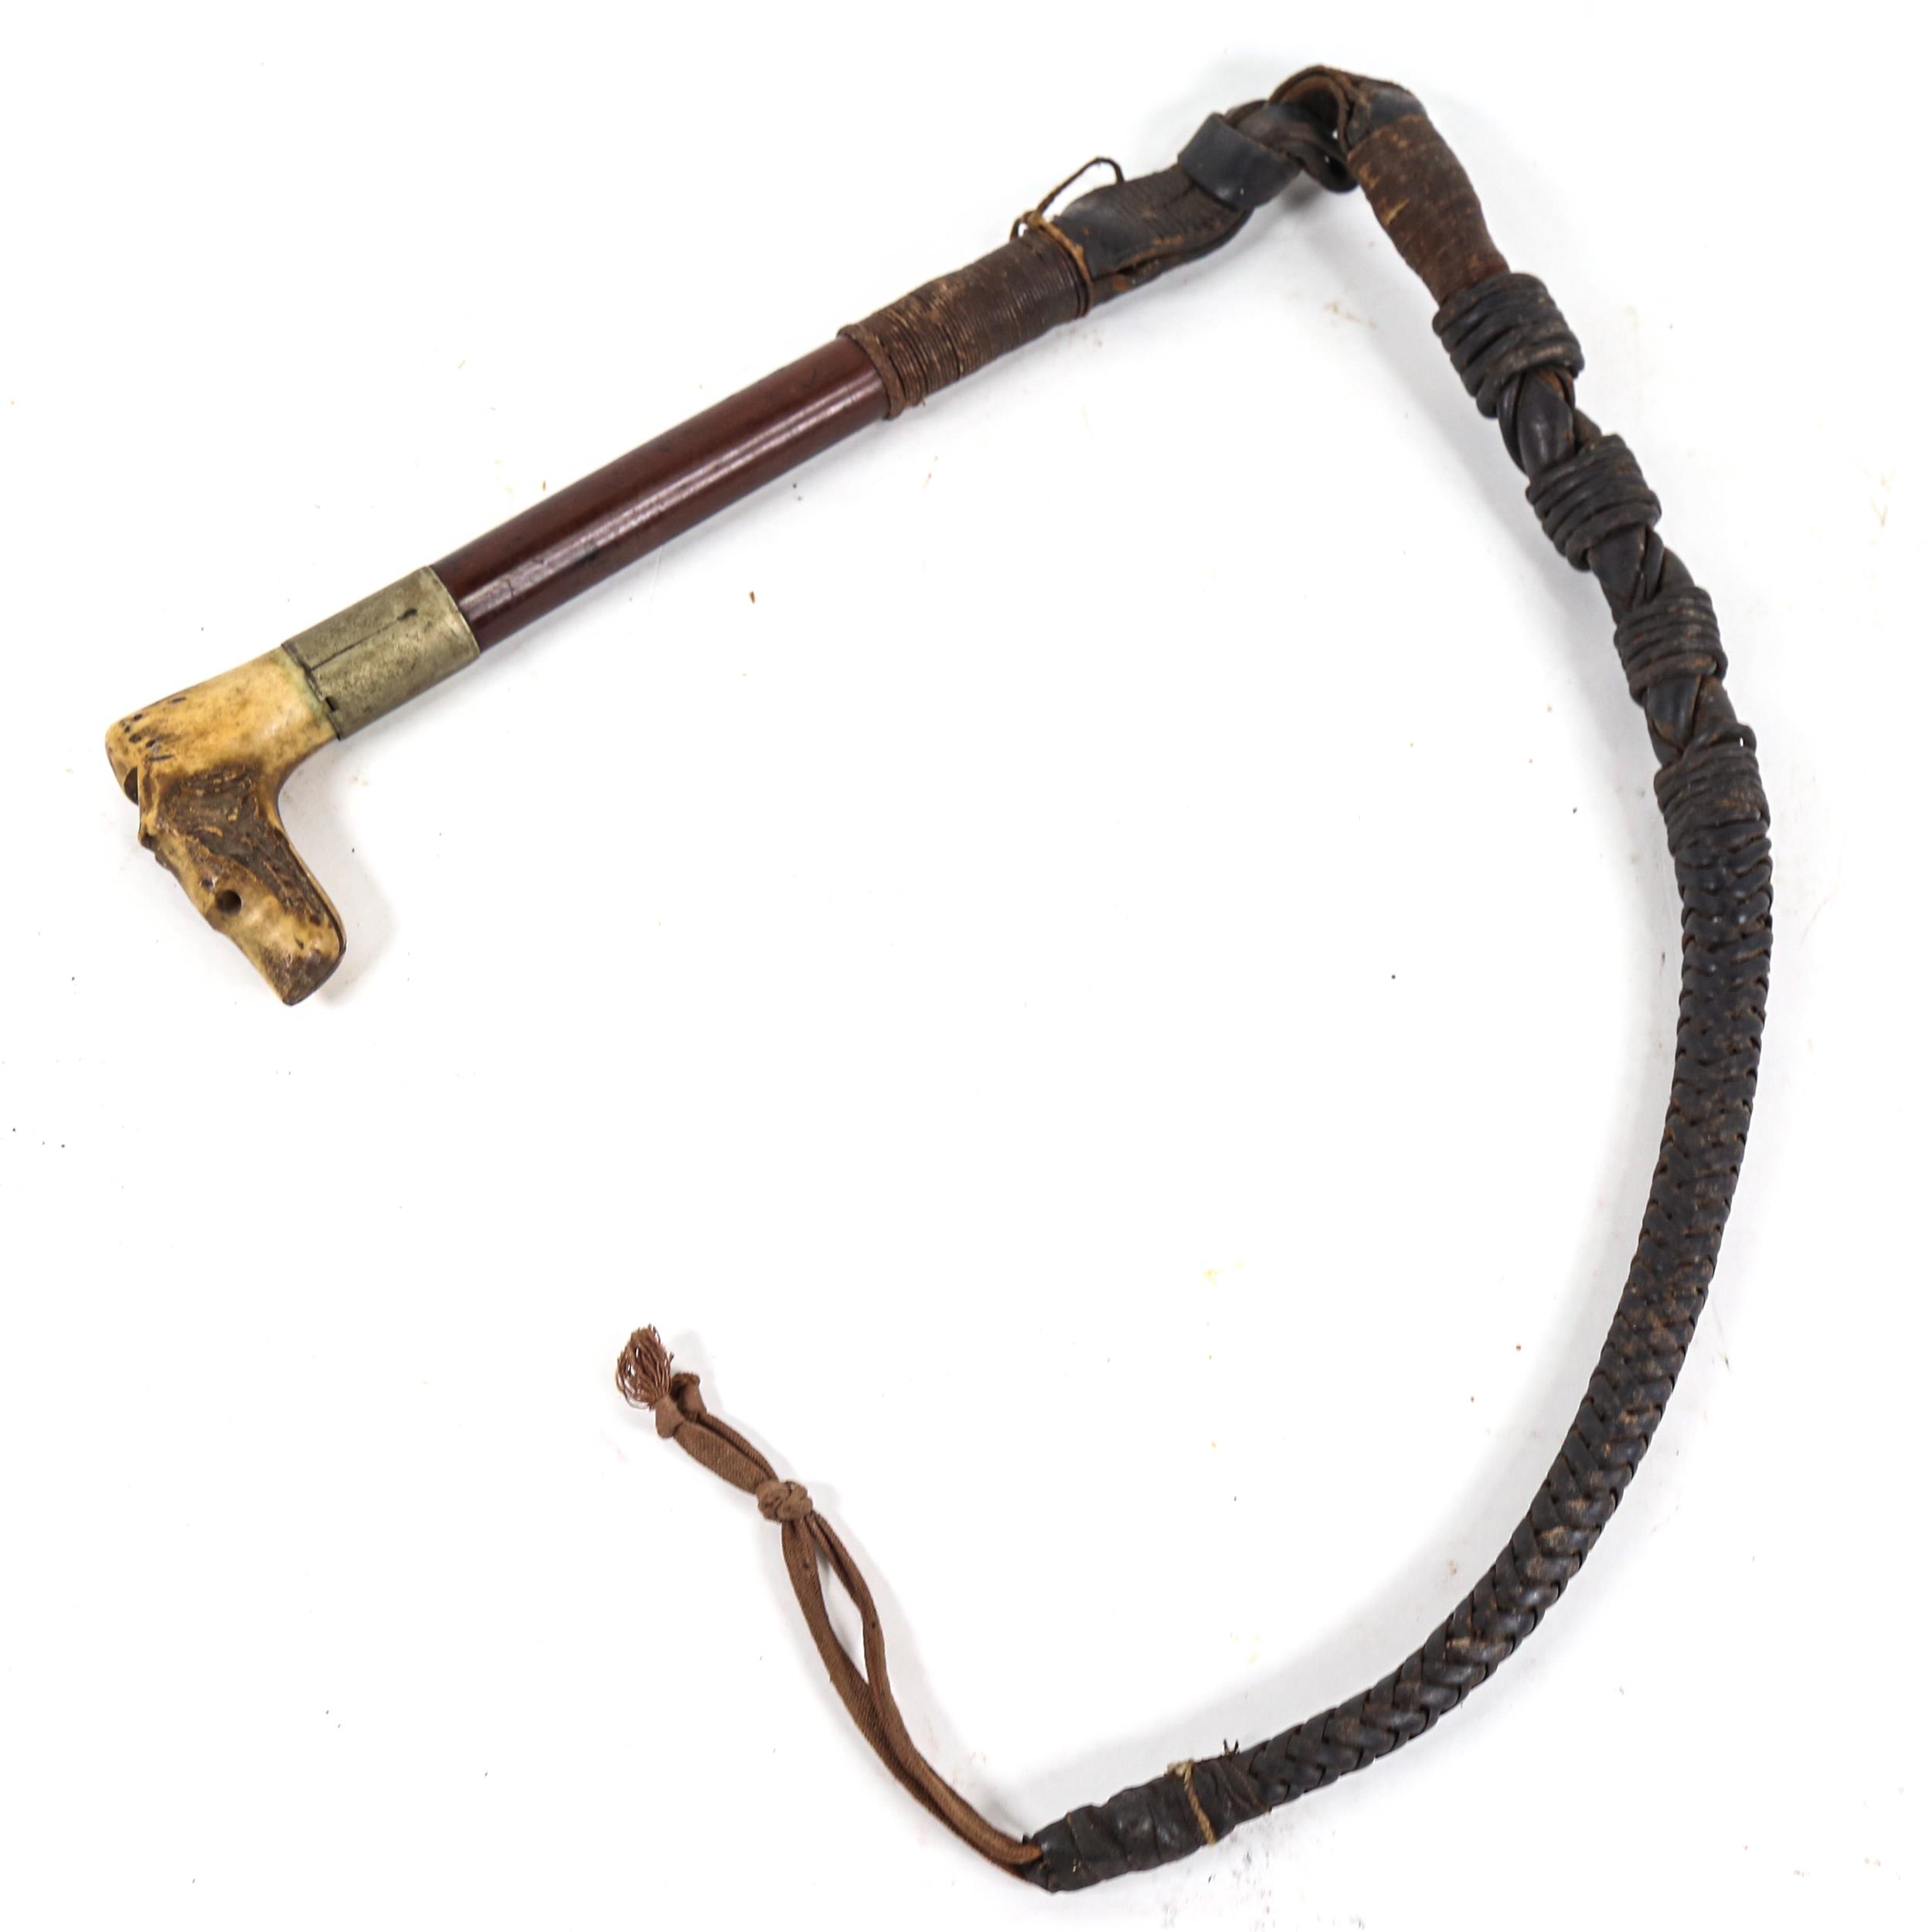 A 19th century novelty figural dog's head whistle riding crop, carved staghorn handle with - Image 2 of 2